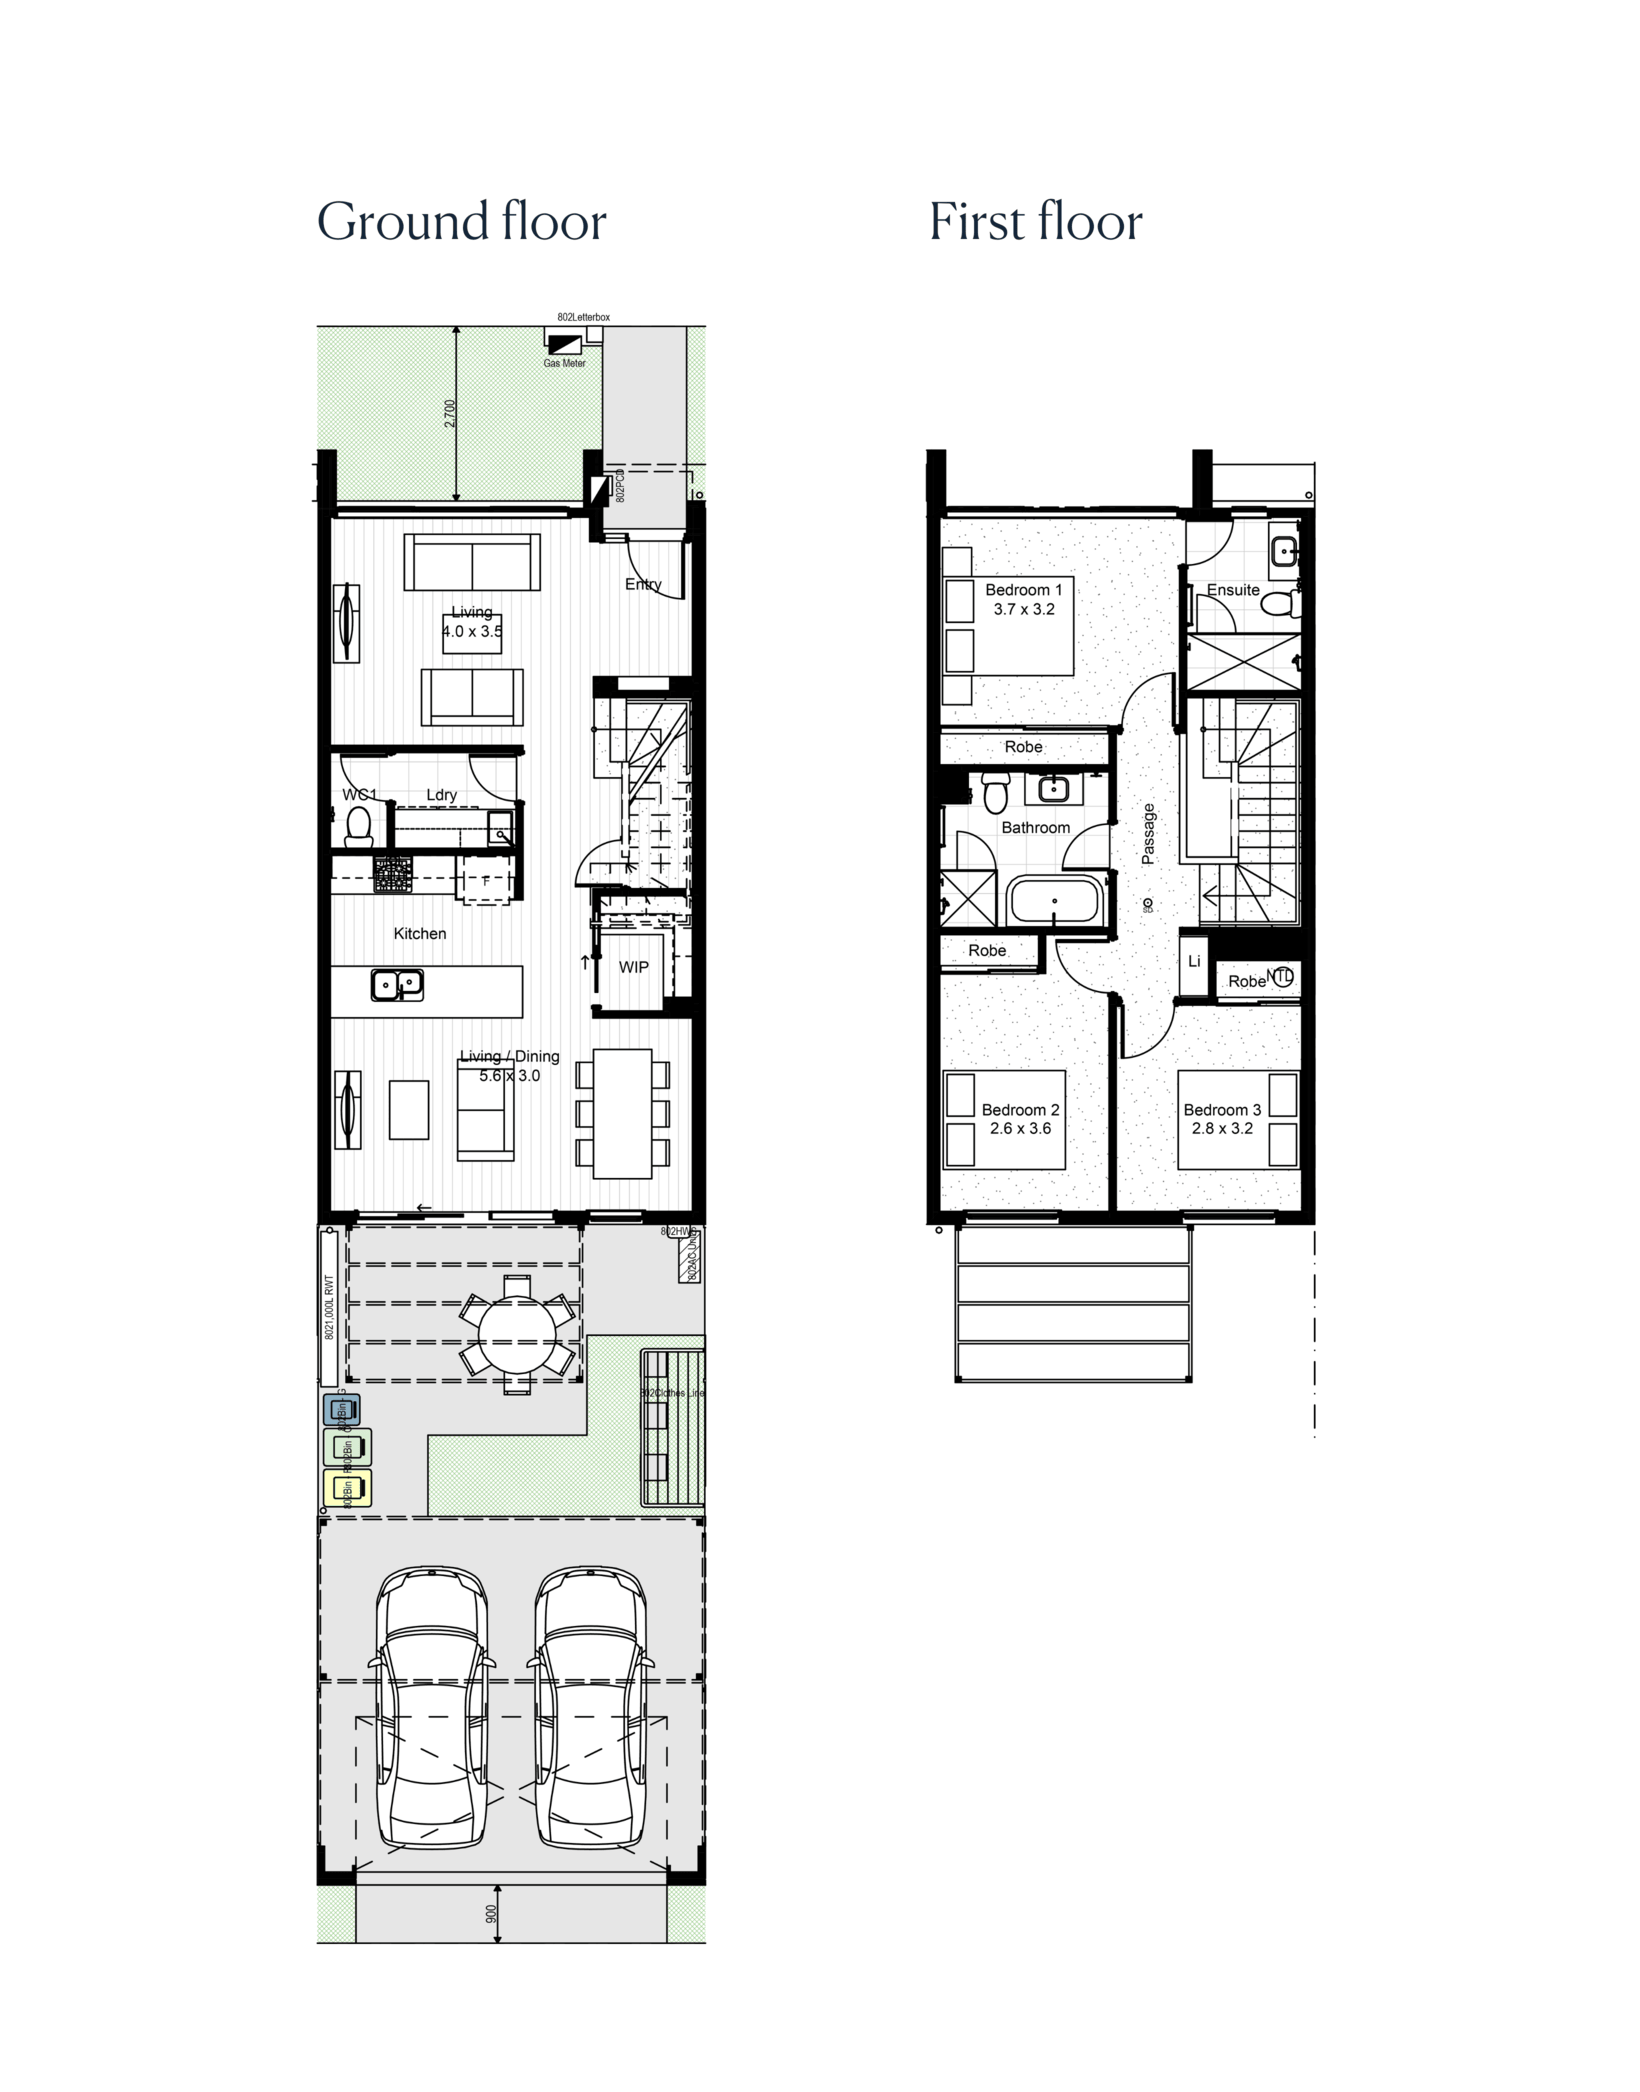 The floorplan for the Option 2 townhome at Riverlea.